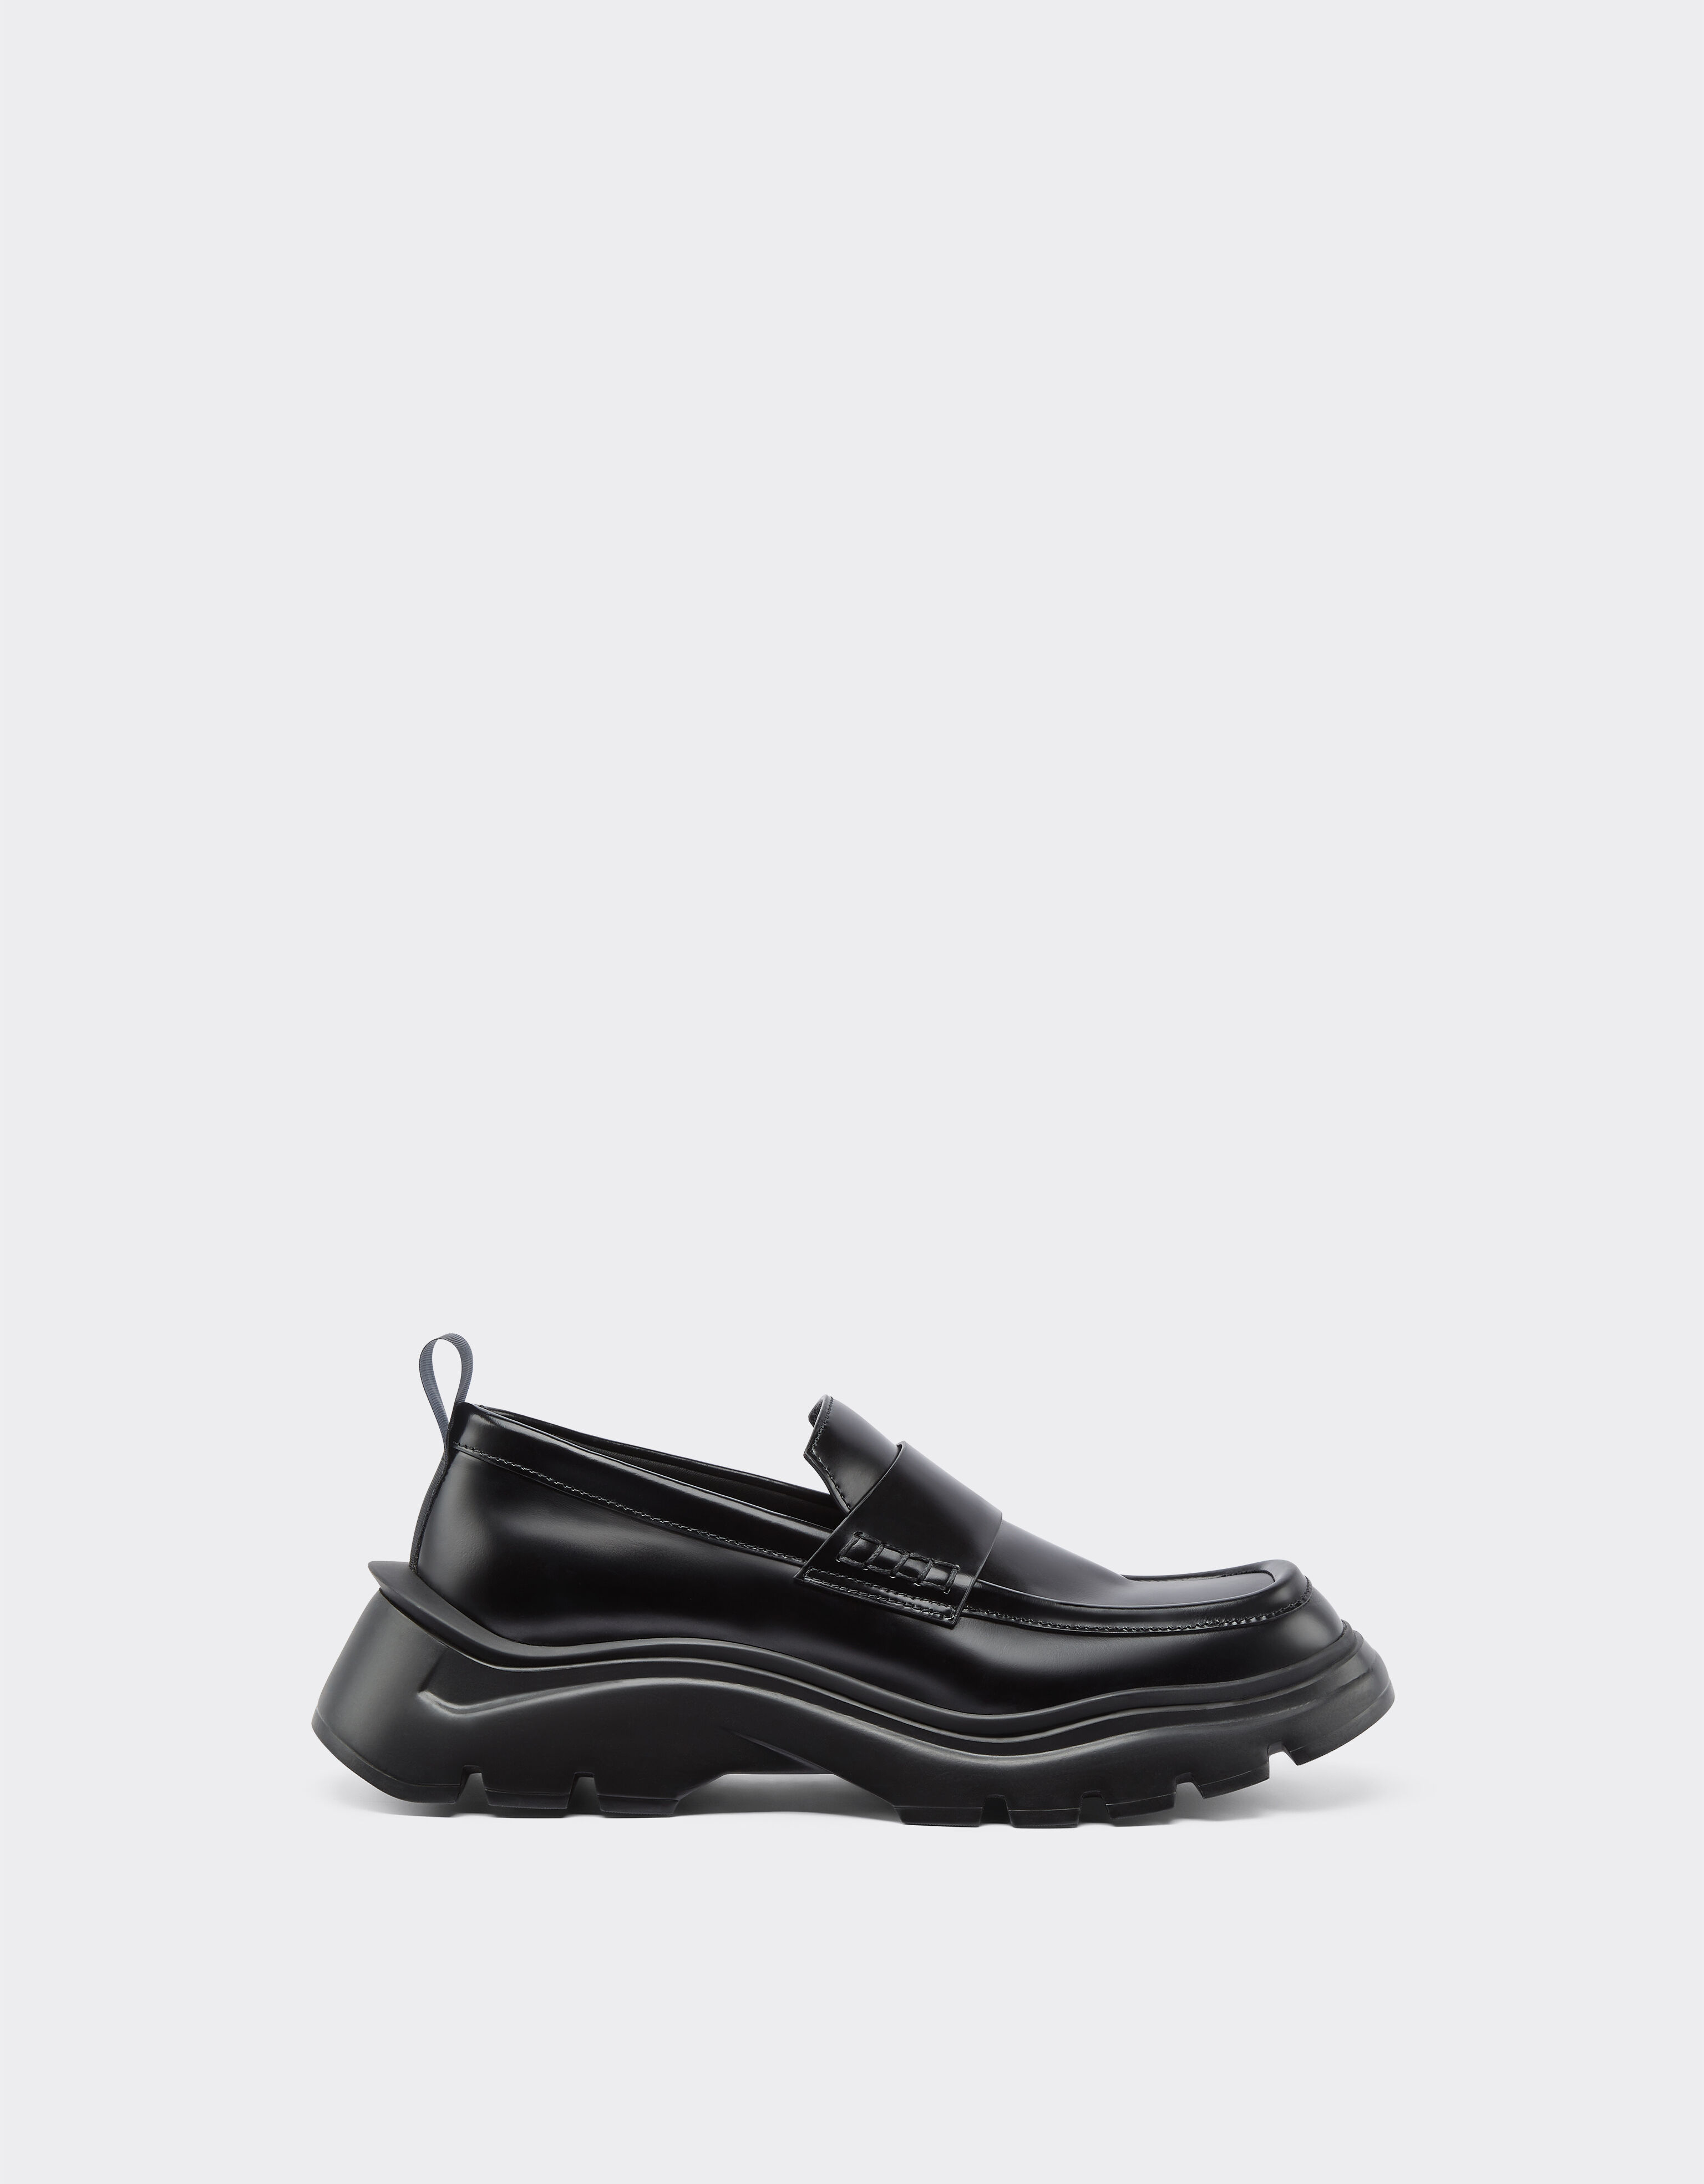 Ferrari Loafers in brushed leather Ingrid 21271f